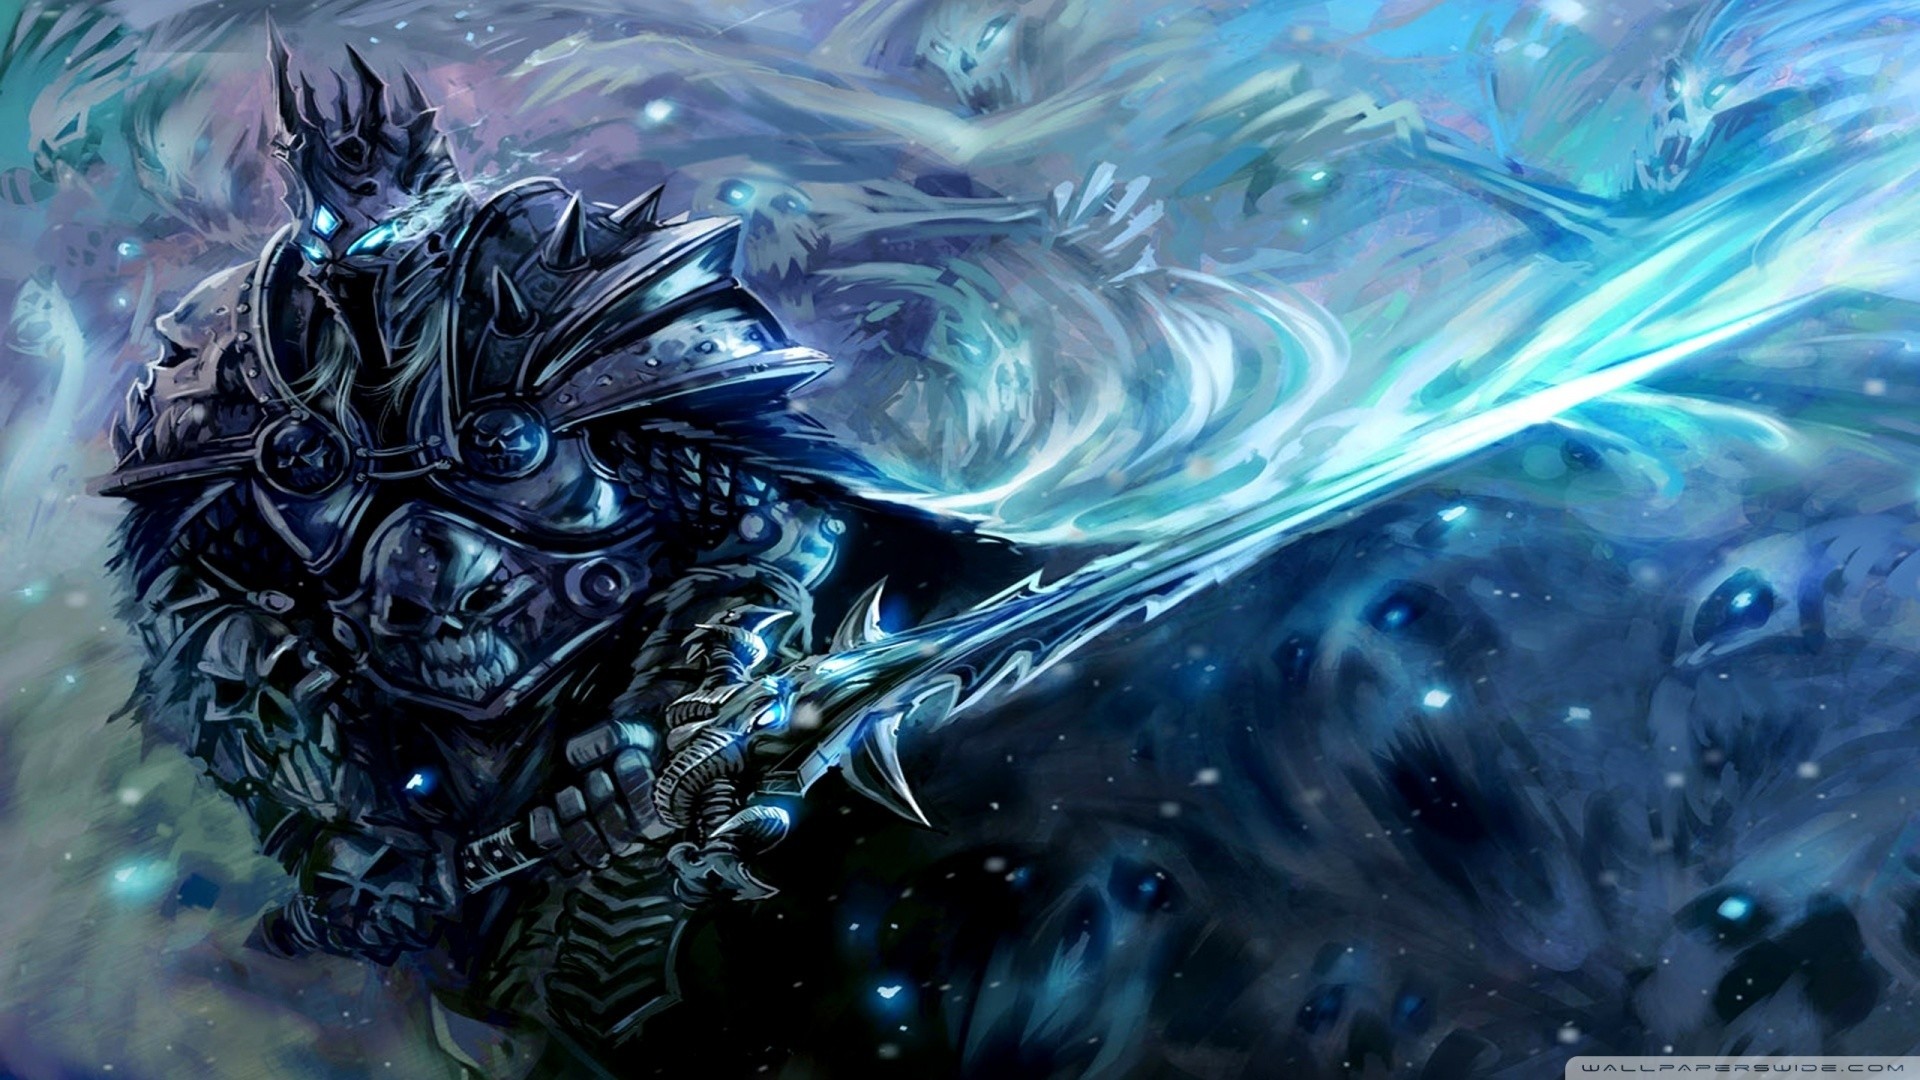 1920x1080 Title : wow death knight wallpaper (80+ images) Dimension : 1920 x 1080.  File Type : JPG/JPEG